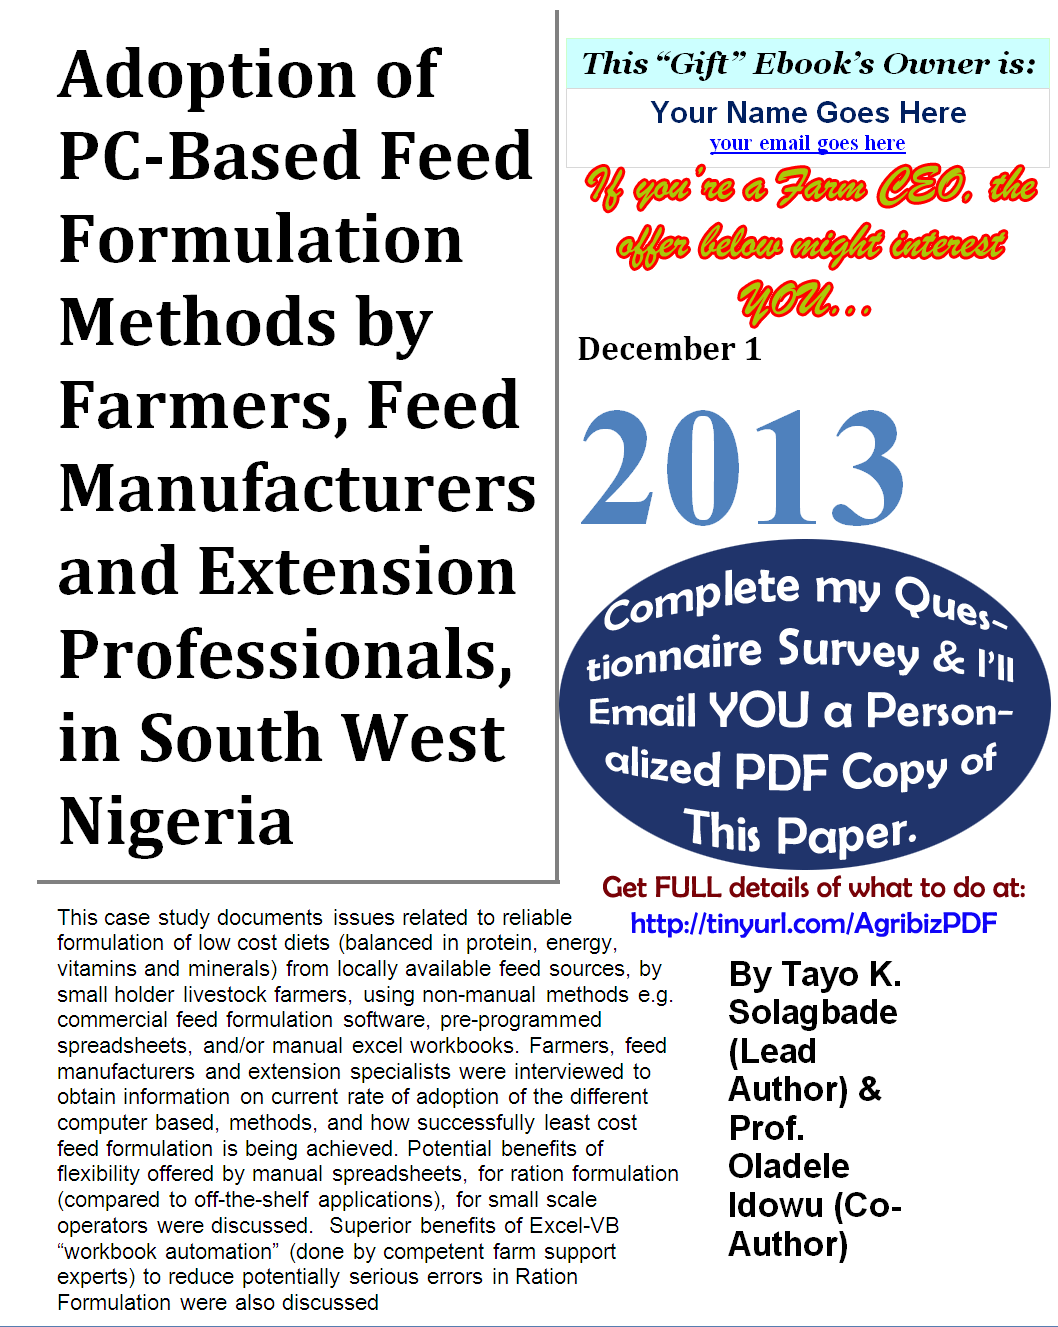 Image: [Annotated] Cover of Agribusiness Research Paper I got paid to write in December 2013 by a European Union funded NGO based in Holland. It's titled 'Adoption of PC-Based Feed Formulation Methods by Farmers, Feed Manufacturers and Extension Professionals, in South West Nigeria.'